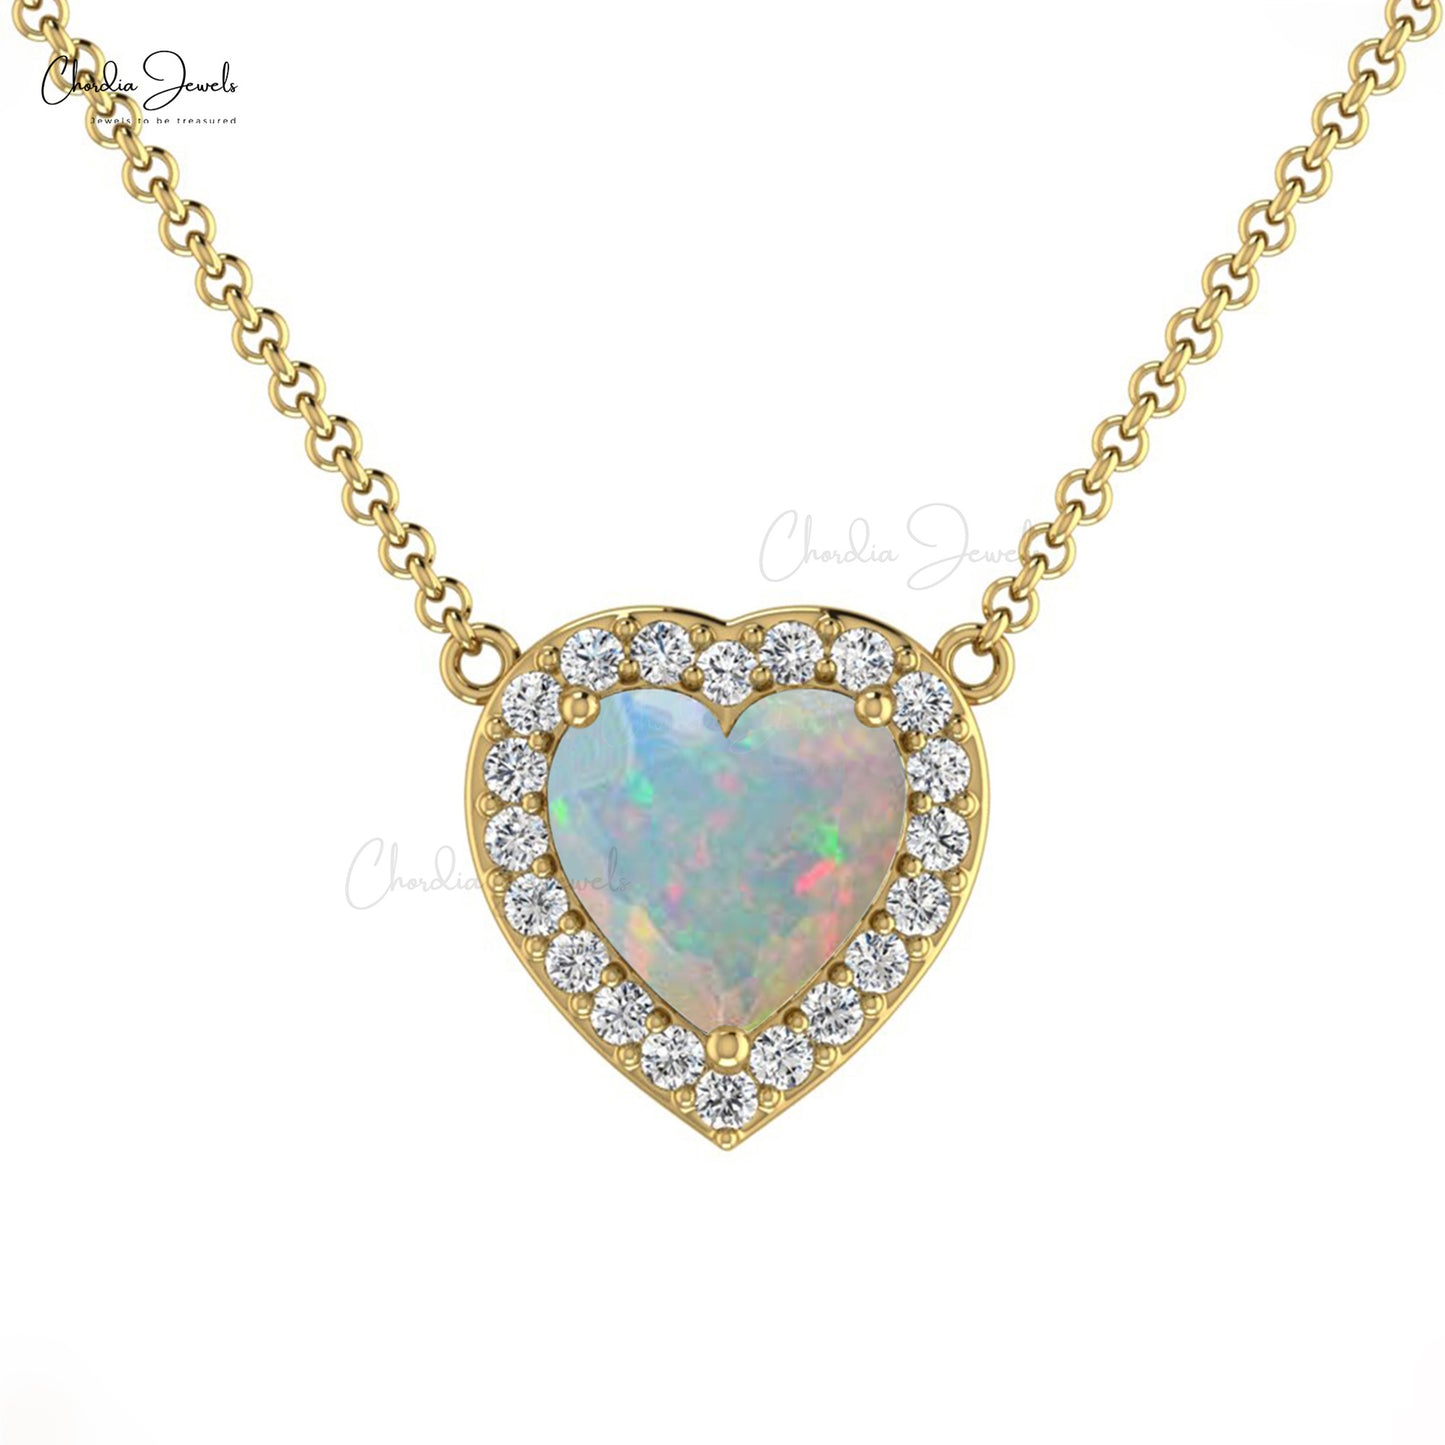 Load image into Gallery viewer, 5mm Heart Shape Gemstone Necklace, Natural Ethiopian Opal Necklace, 14k Solid Gold Necklace Gift for Wedding
